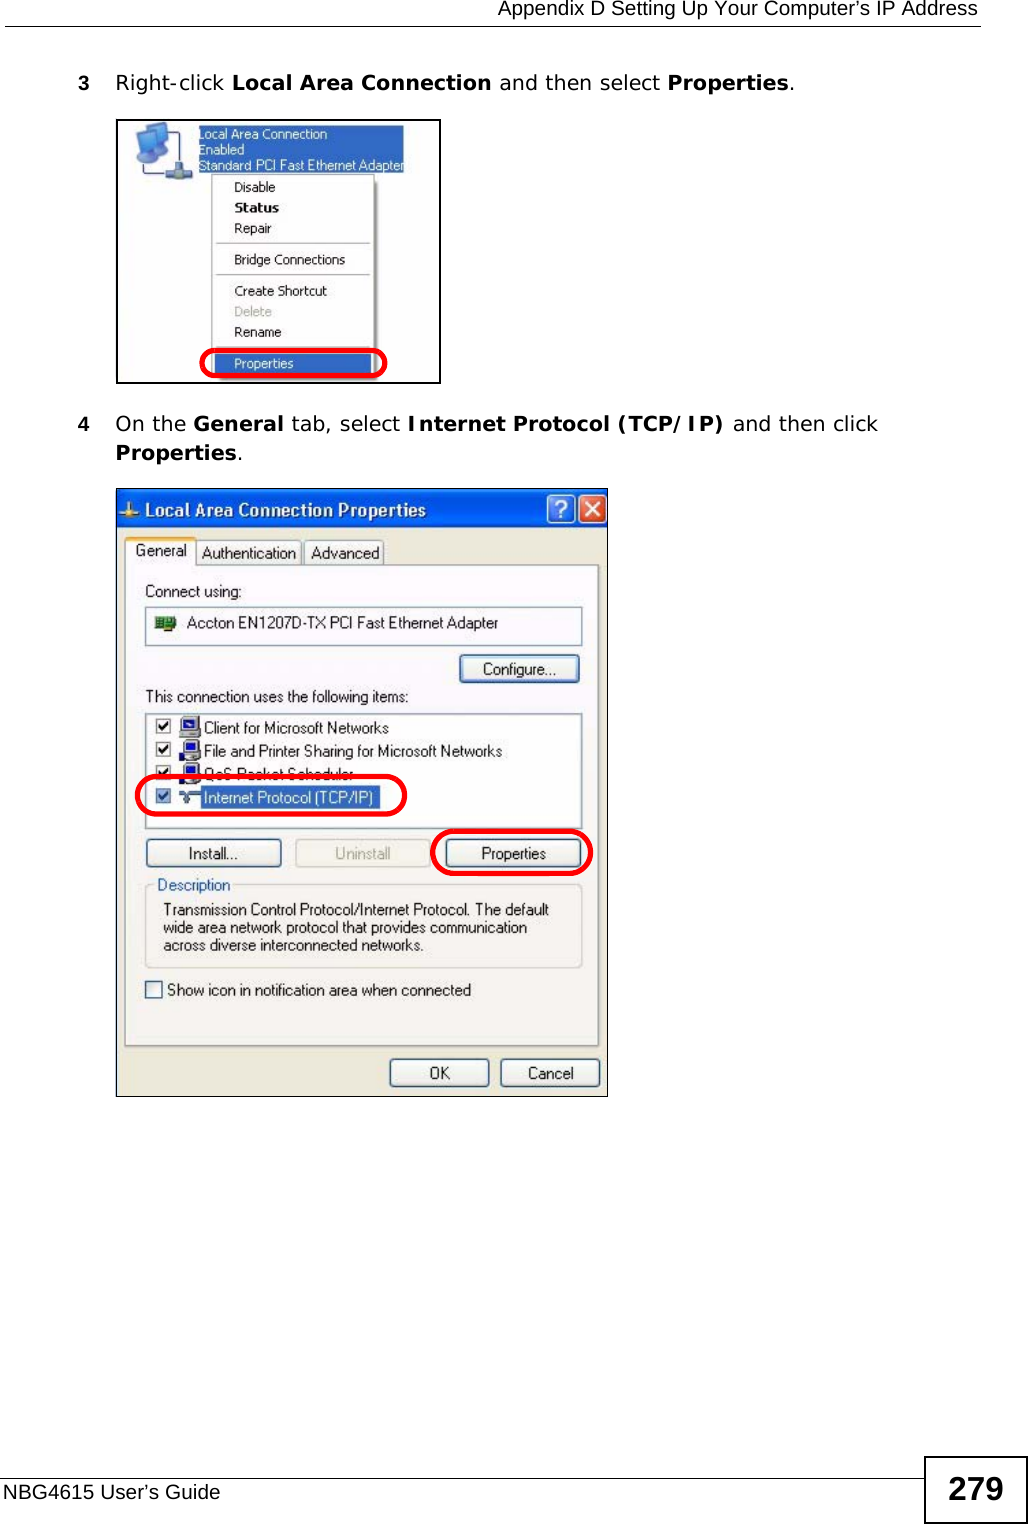  Appendix D Setting Up Your Computer’s IP AddressNBG4615 User’s Guide 2793Right-click Local Area Connection and then select Properties.4On the General tab, select Internet Protocol (TCP/IP) and then click Properties.